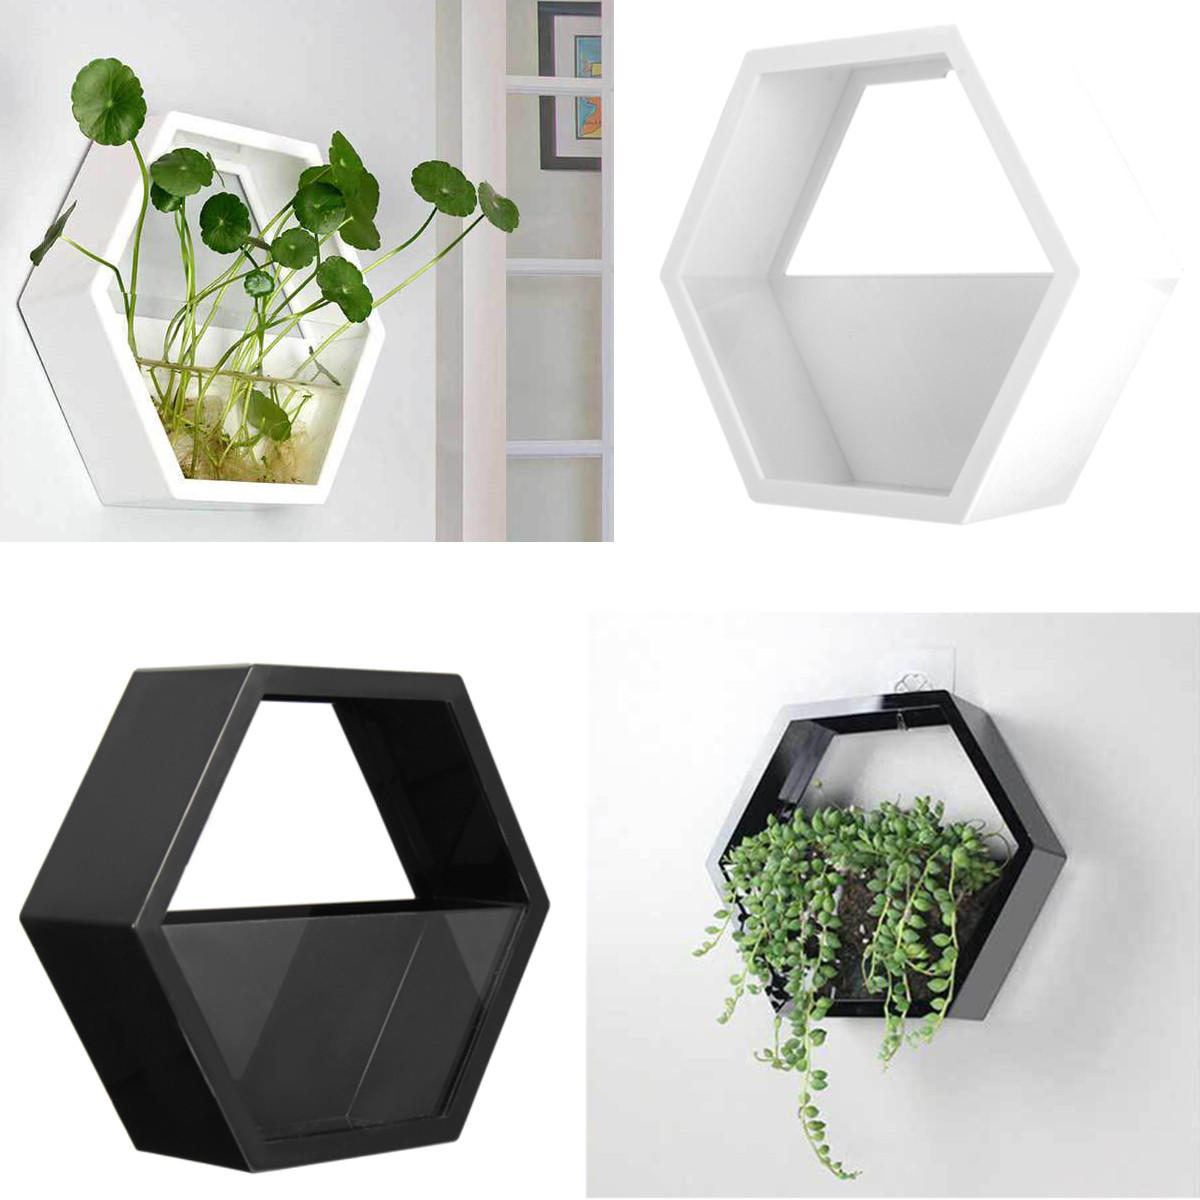 

Hexagon Hanging Wall Basket Plant Flower Pot Box for Home Balcony Garden Decorations